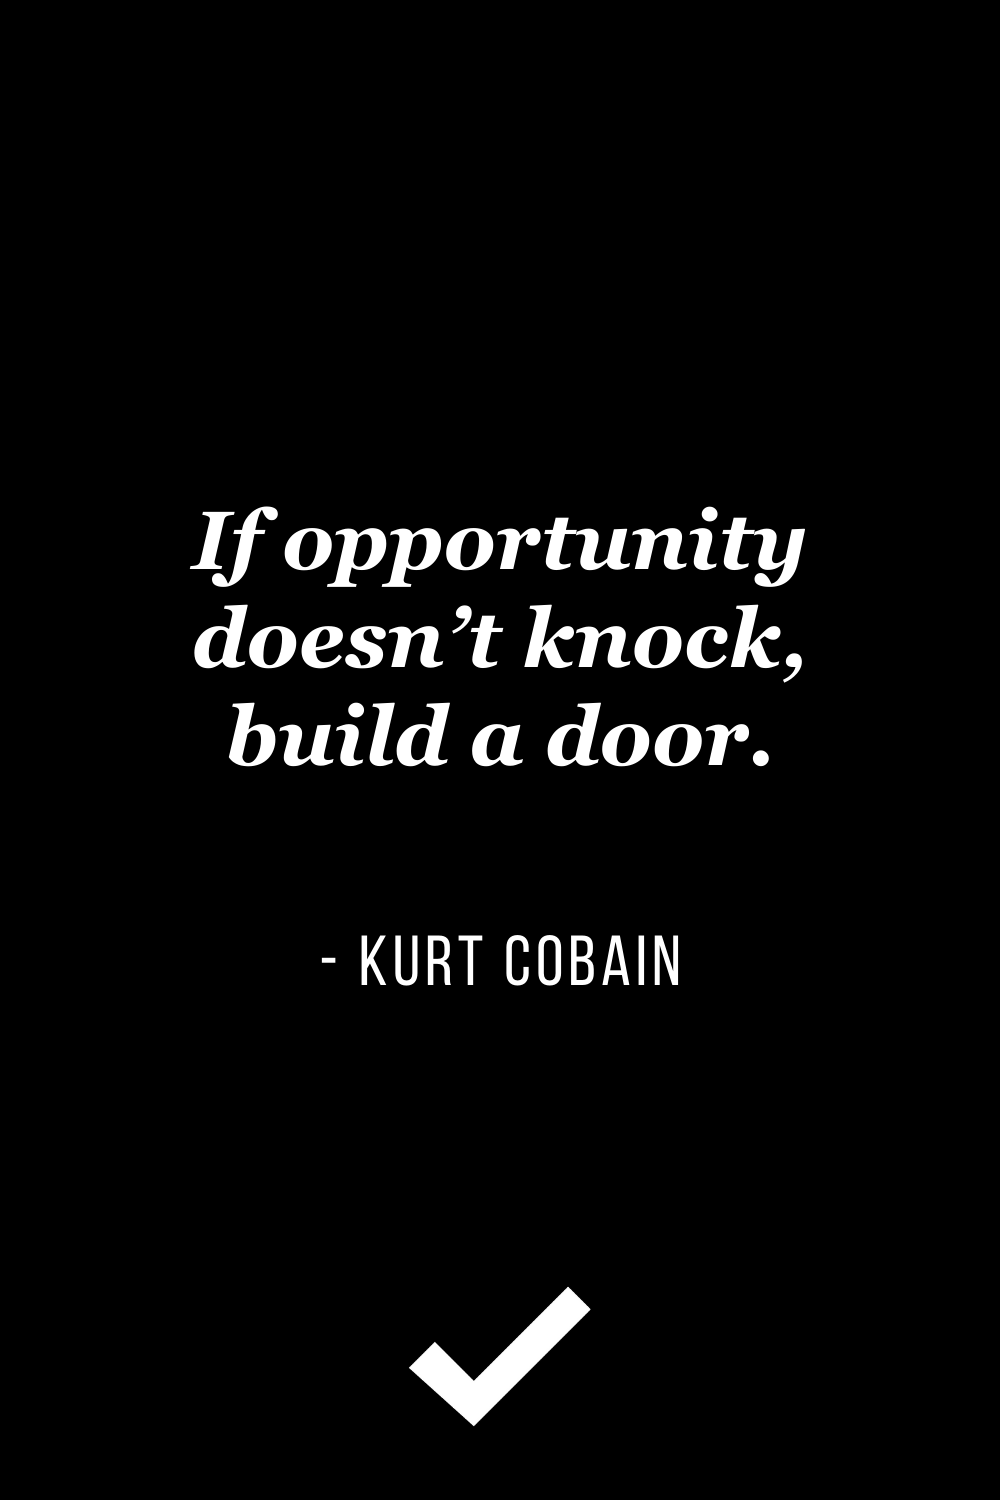 If opportunity doesn’t knock, build a door.